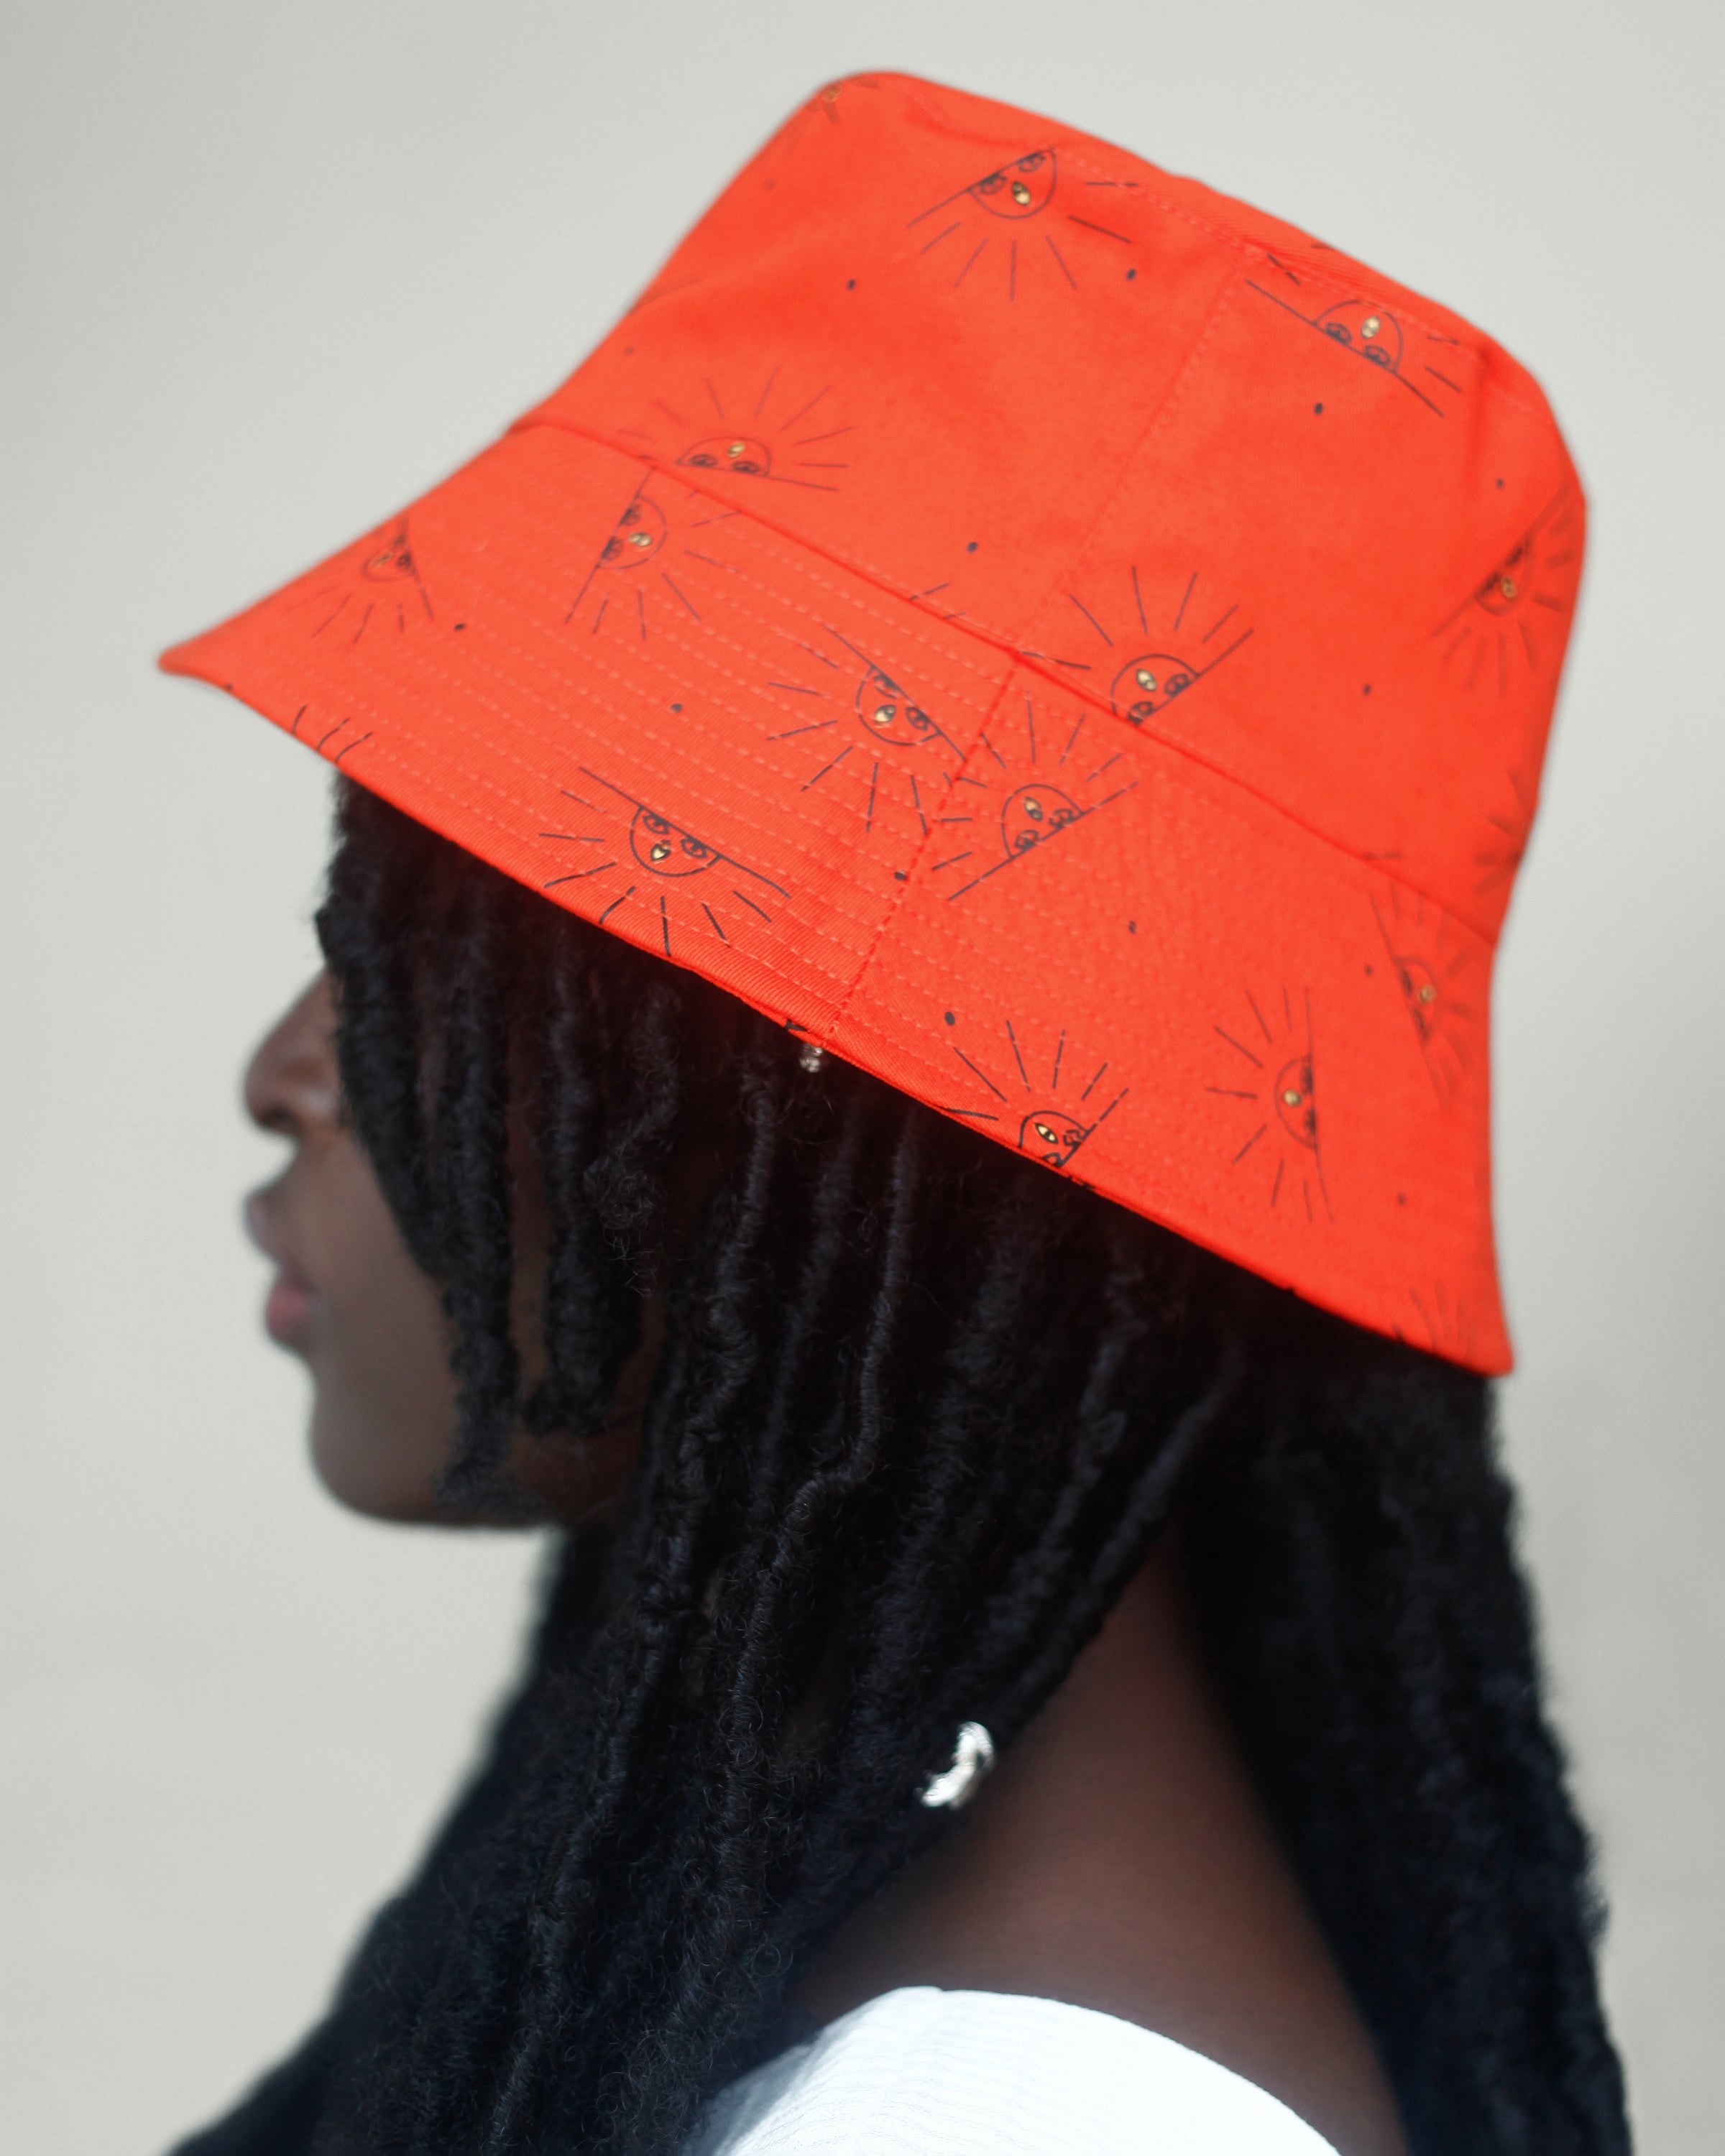 Satin Lined Printed Bucket Hat in Sol